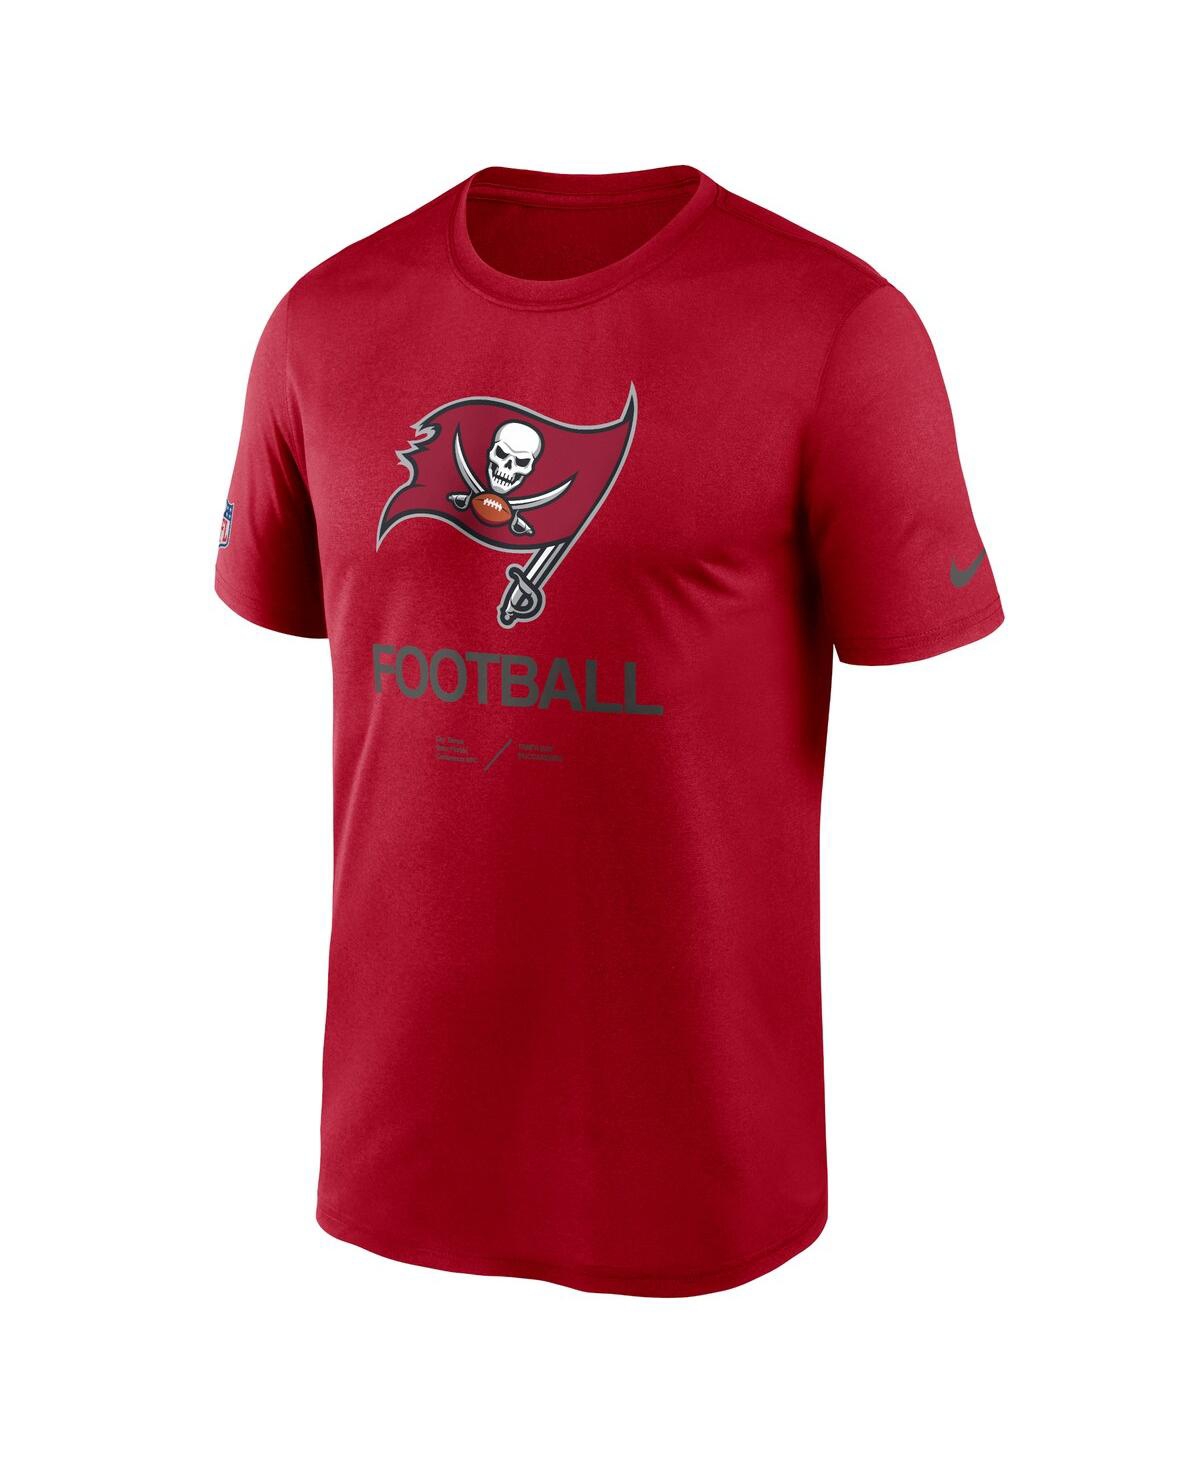 Shop Nike Men's  Red Tampa Bay Buccaneers Infographic Performance T-shirt